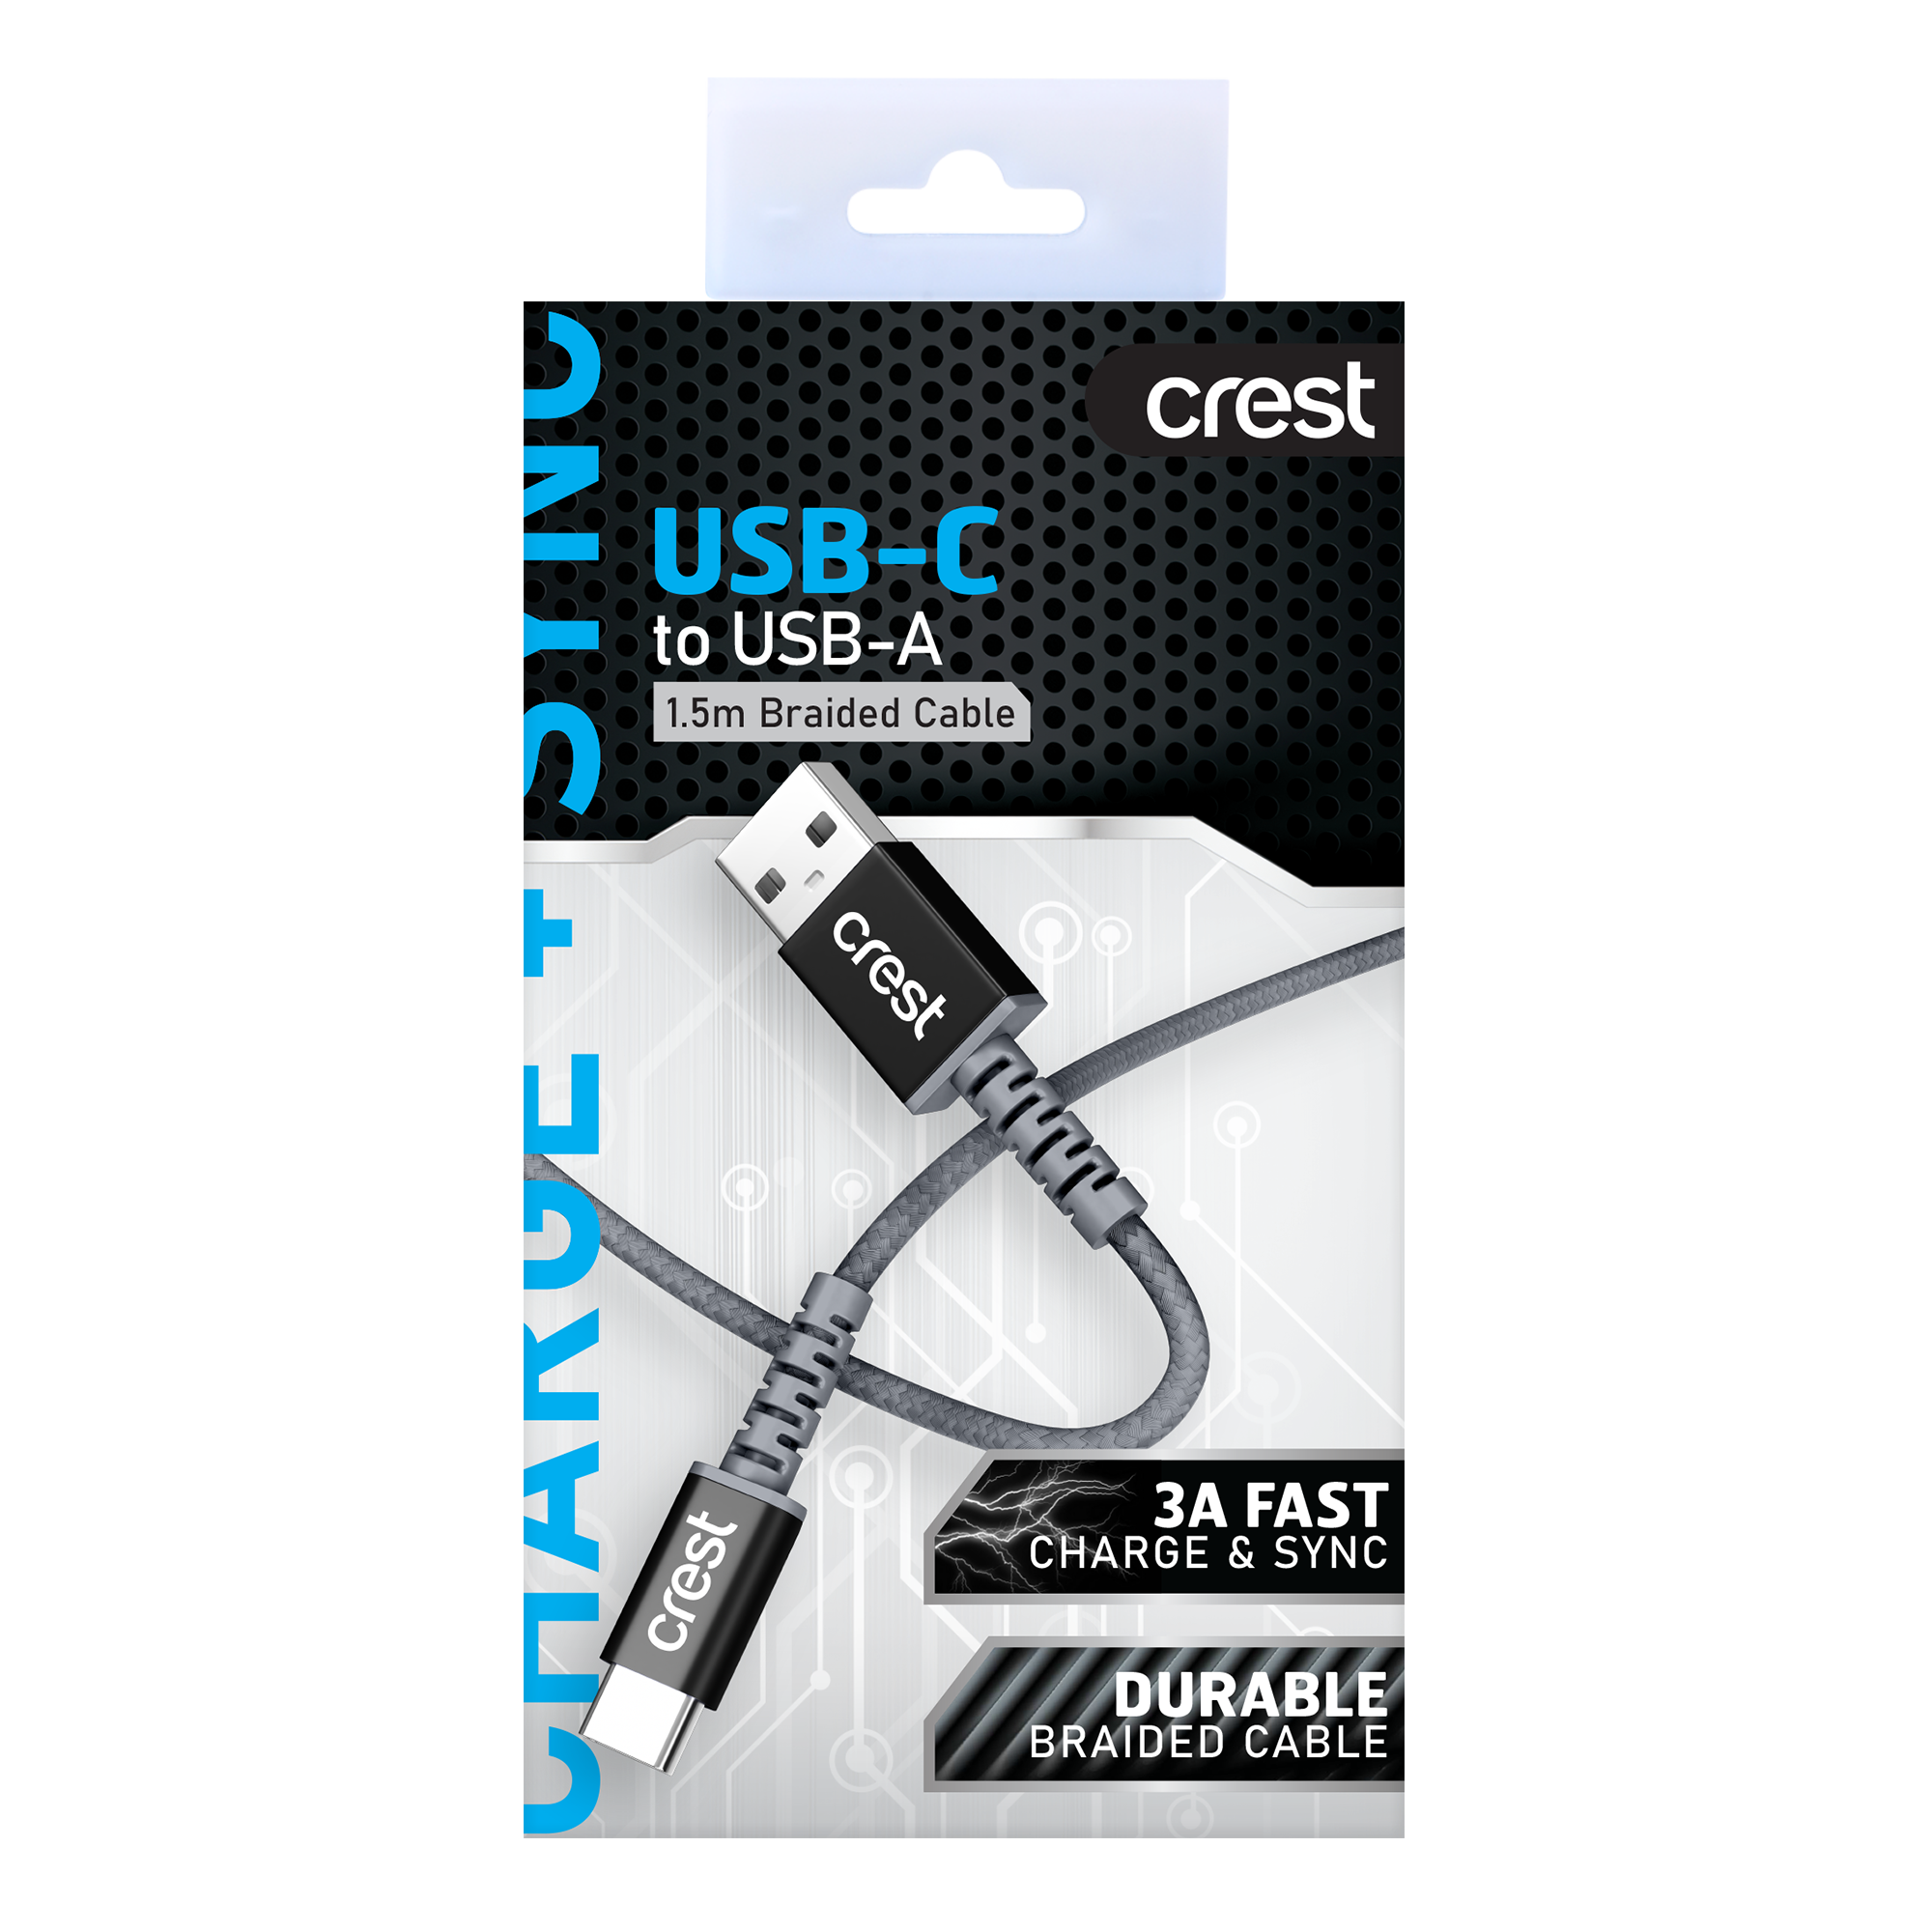 USB-C to USB-A Braided Cable 1.5M - Grey